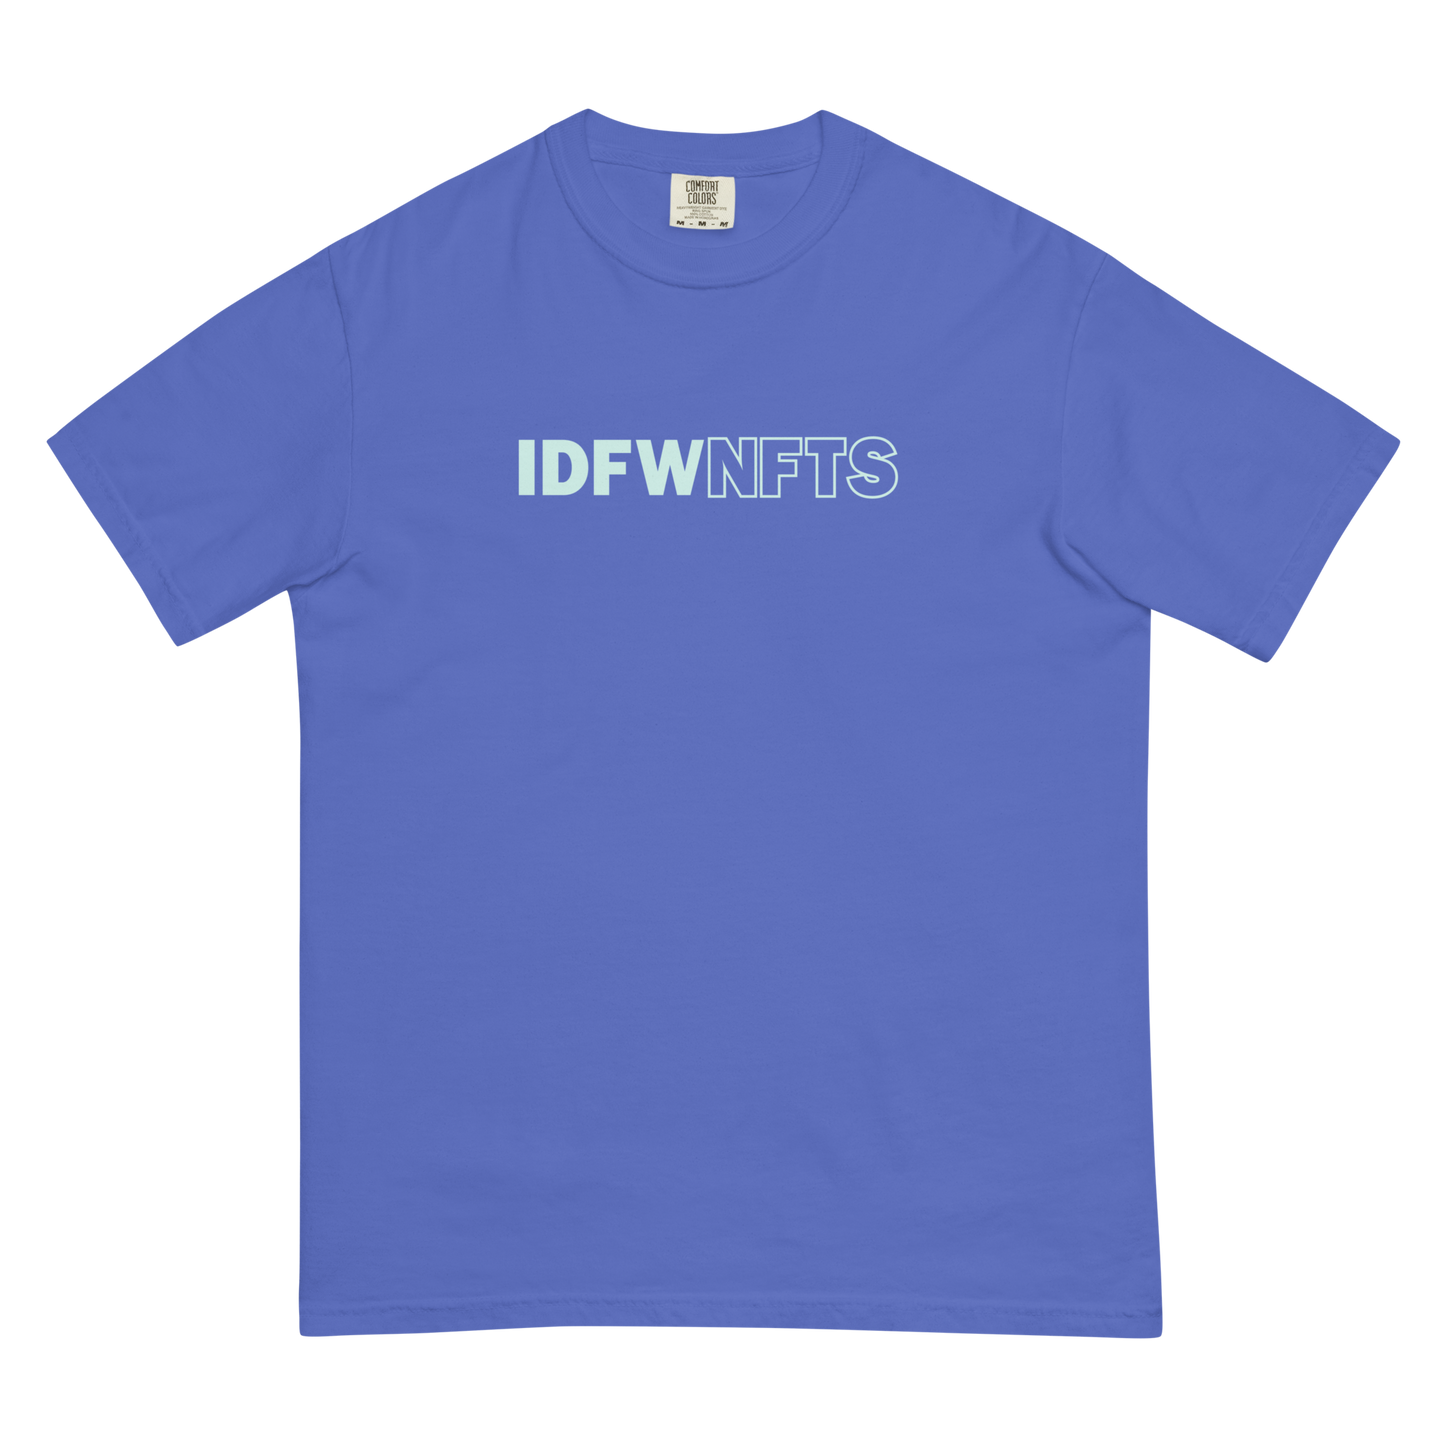 IDFWNFTS Teal Print Graphic Tee